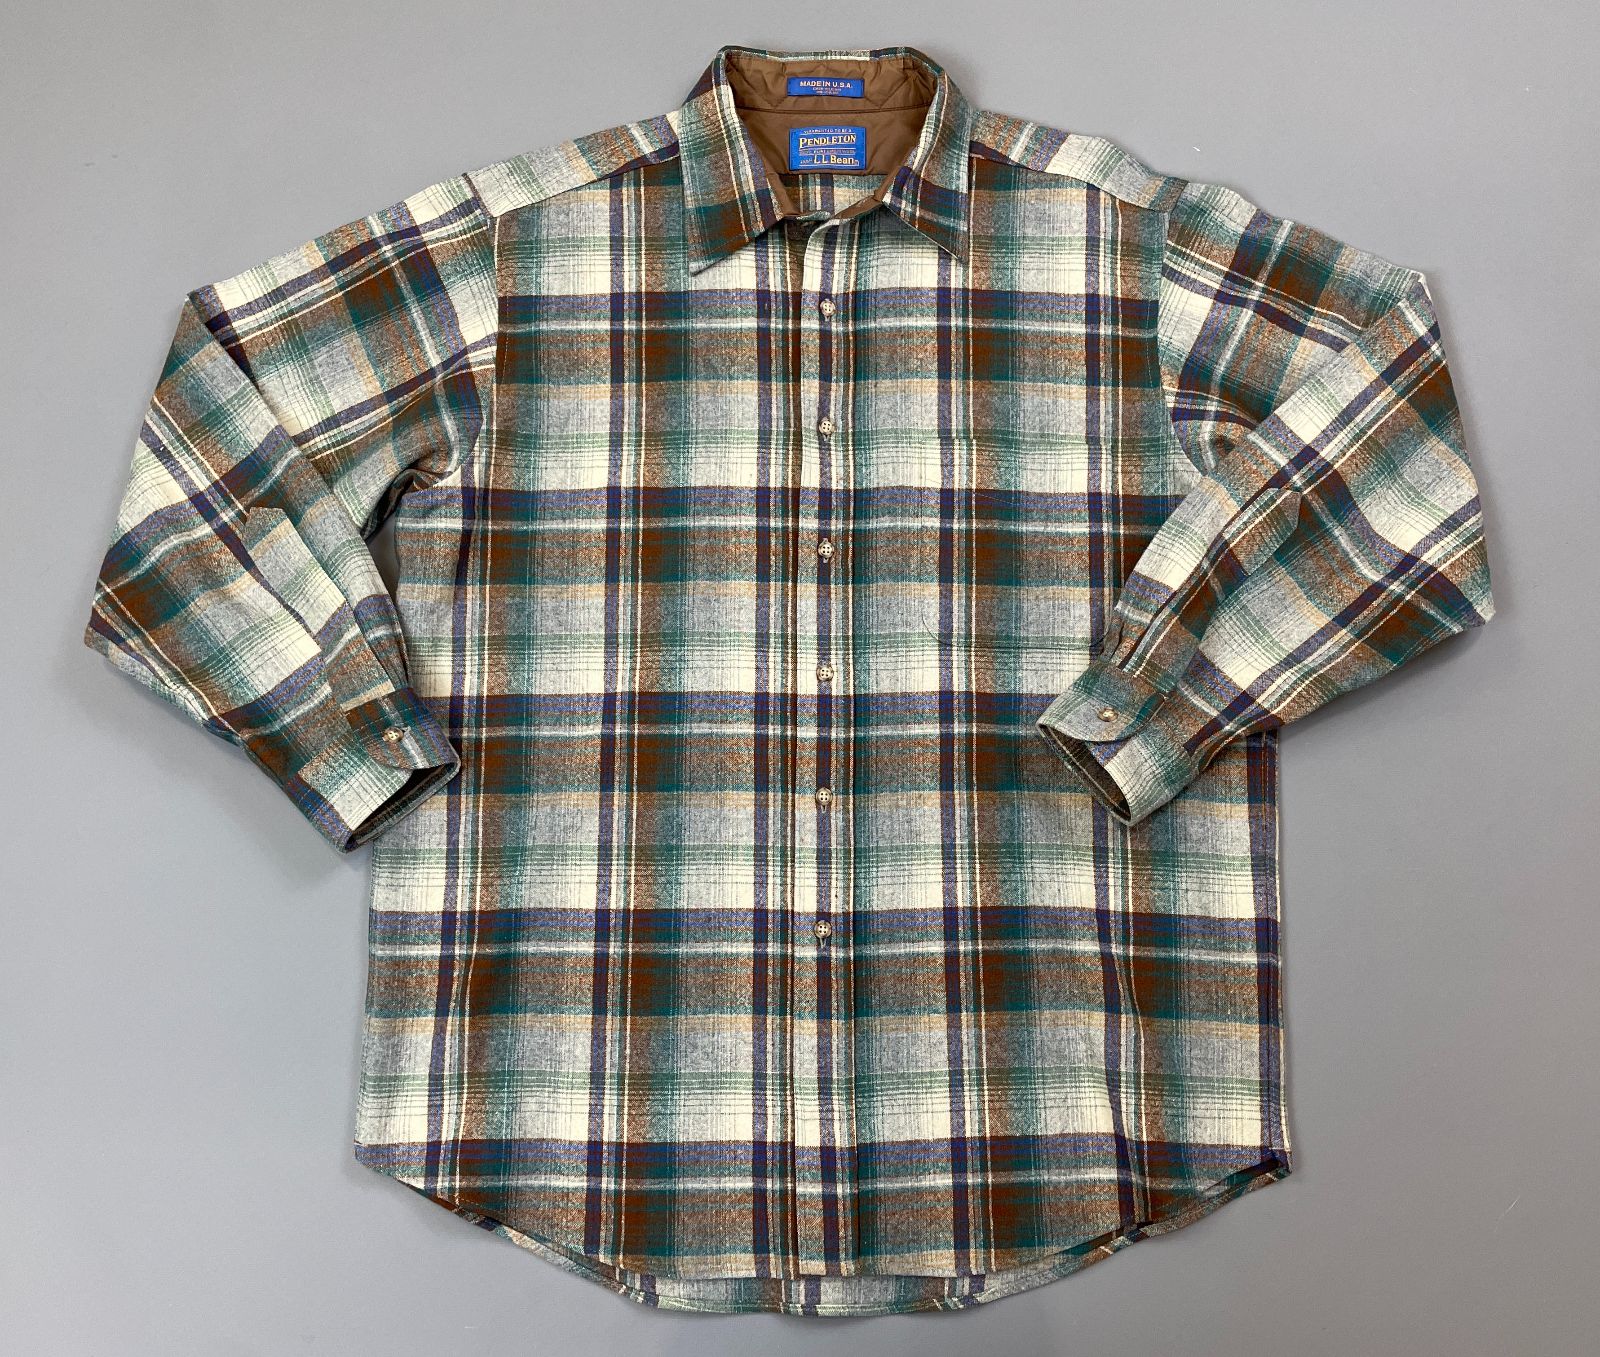 product details: PENDLETON LL BEAN 100% WOOL FLANNEL BUTTON UP SHIRT photo